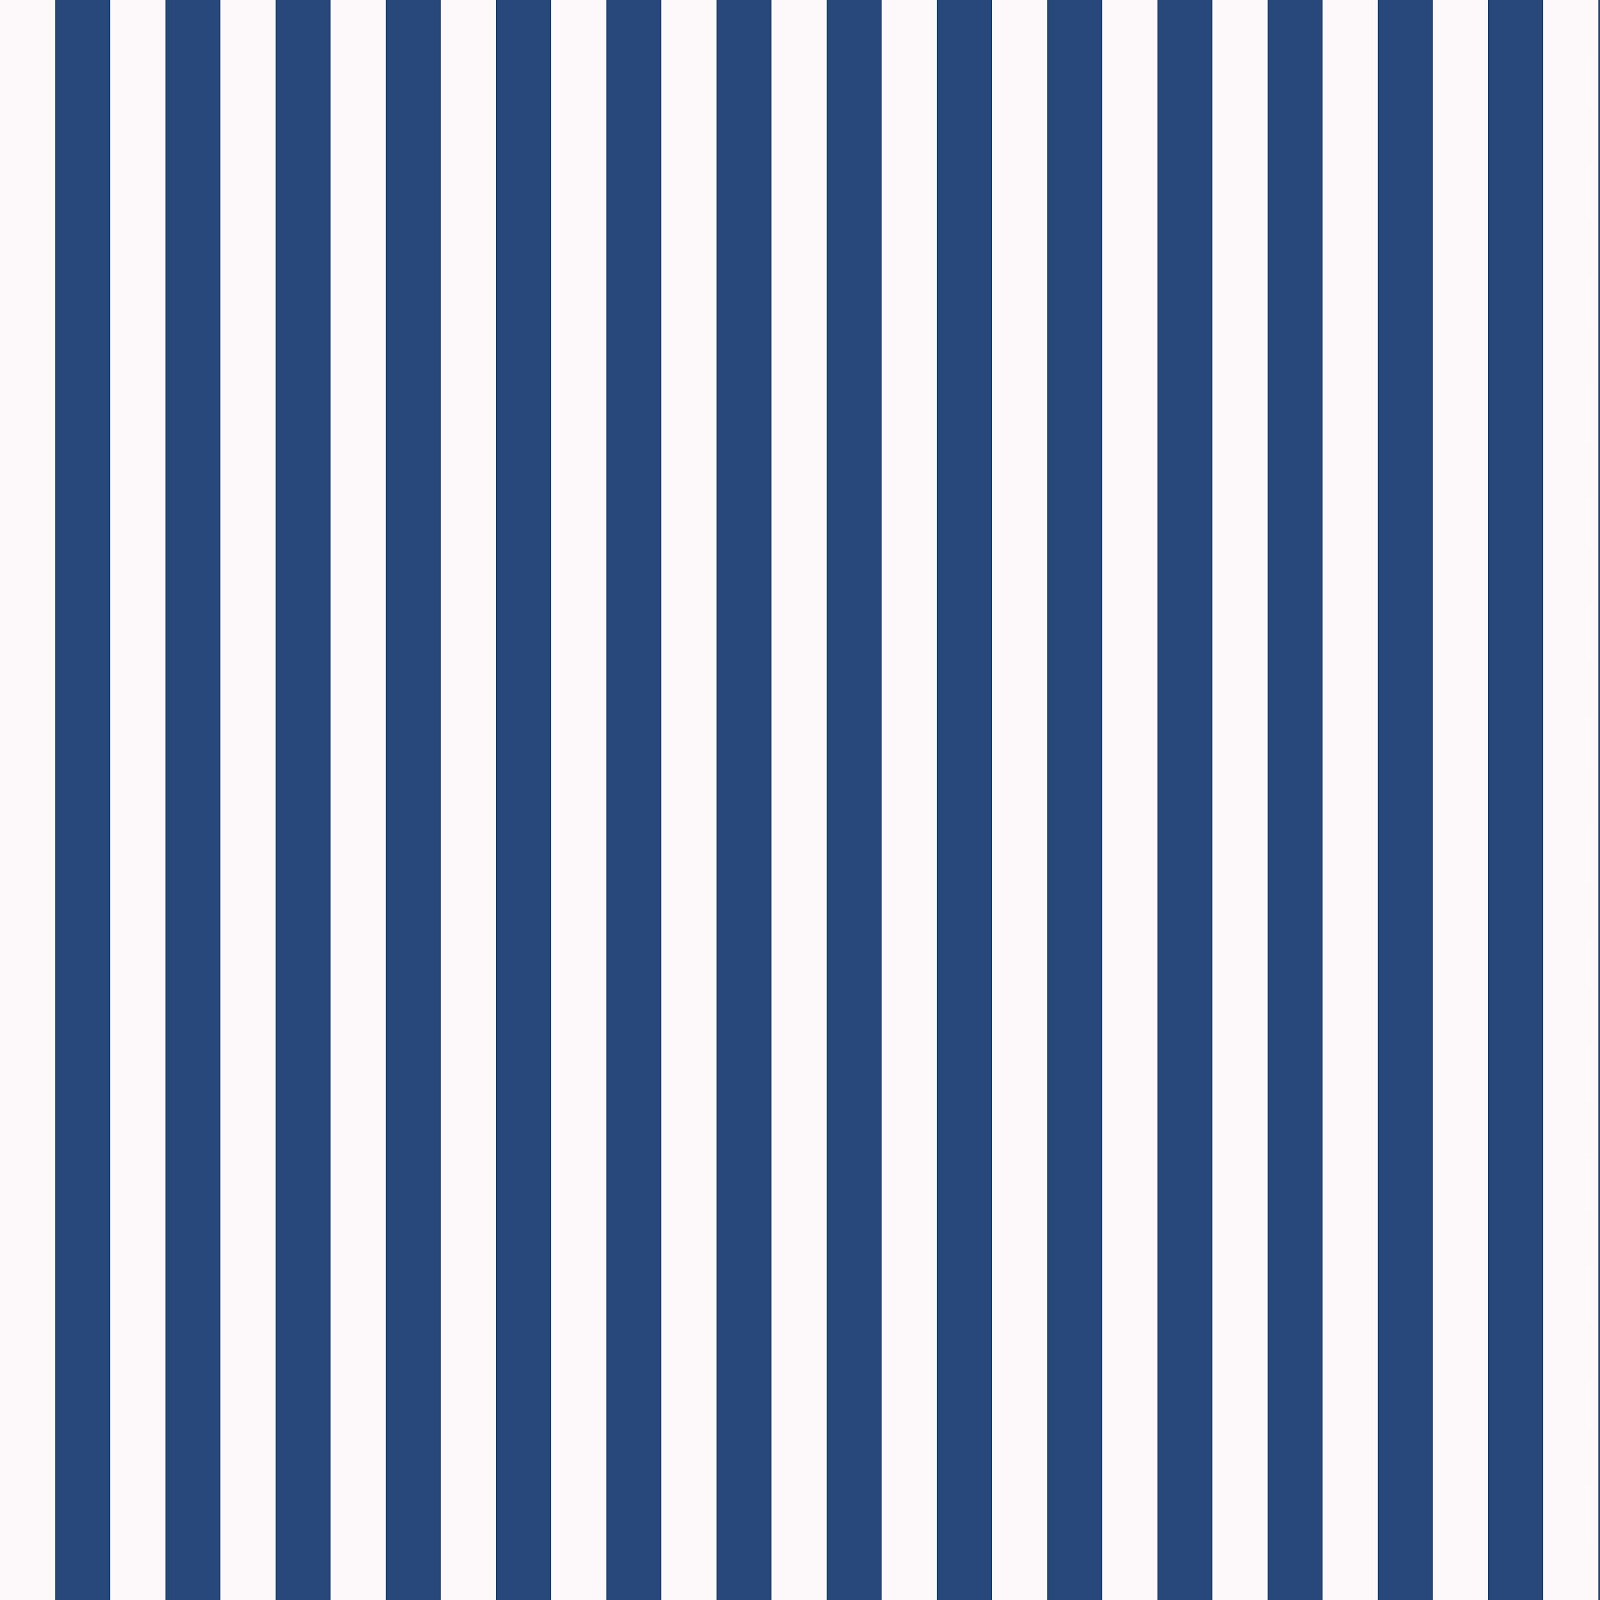 Navy Blue And White Striped Background Images Pictures   Becuo 1600x1600